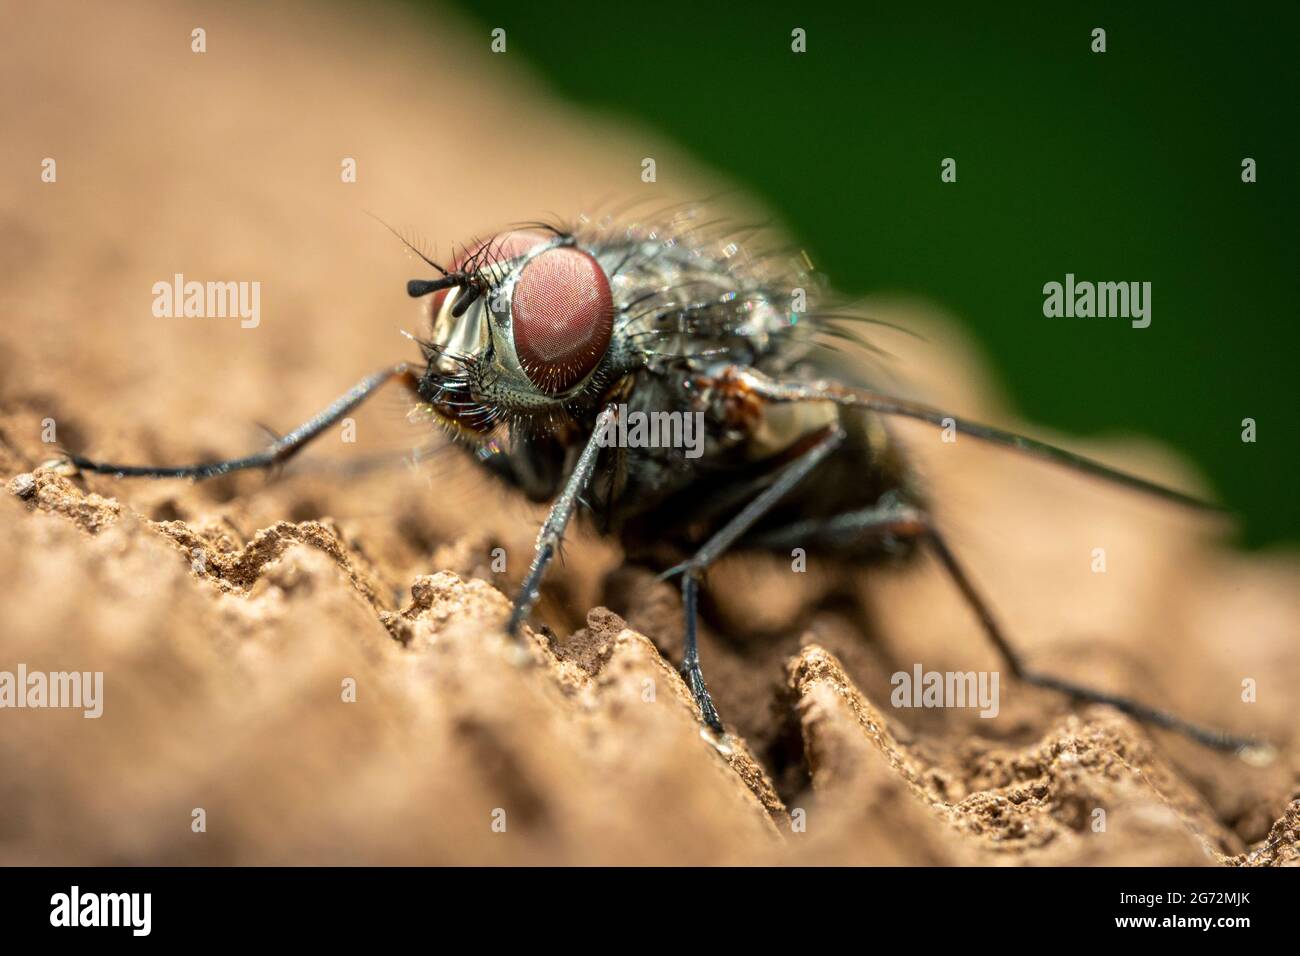 A close-up of a fly with large red compound eyes and a hairy black body. Stock Photo